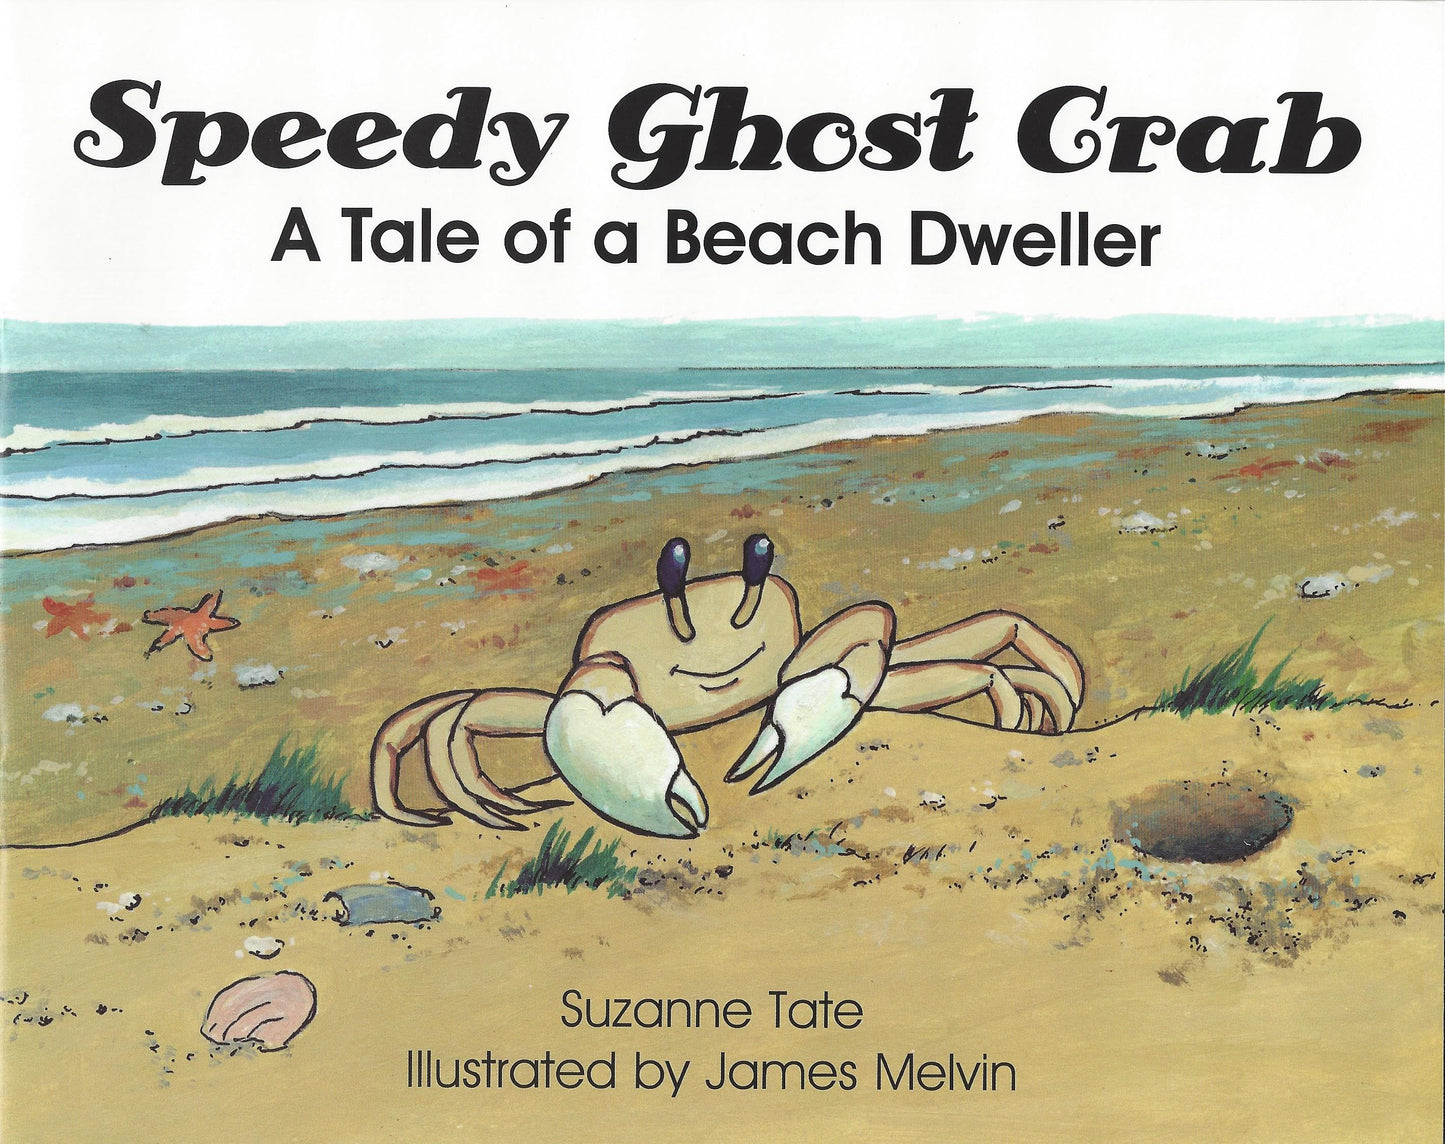 Speedy Ghost Crab by Suzanne Tate